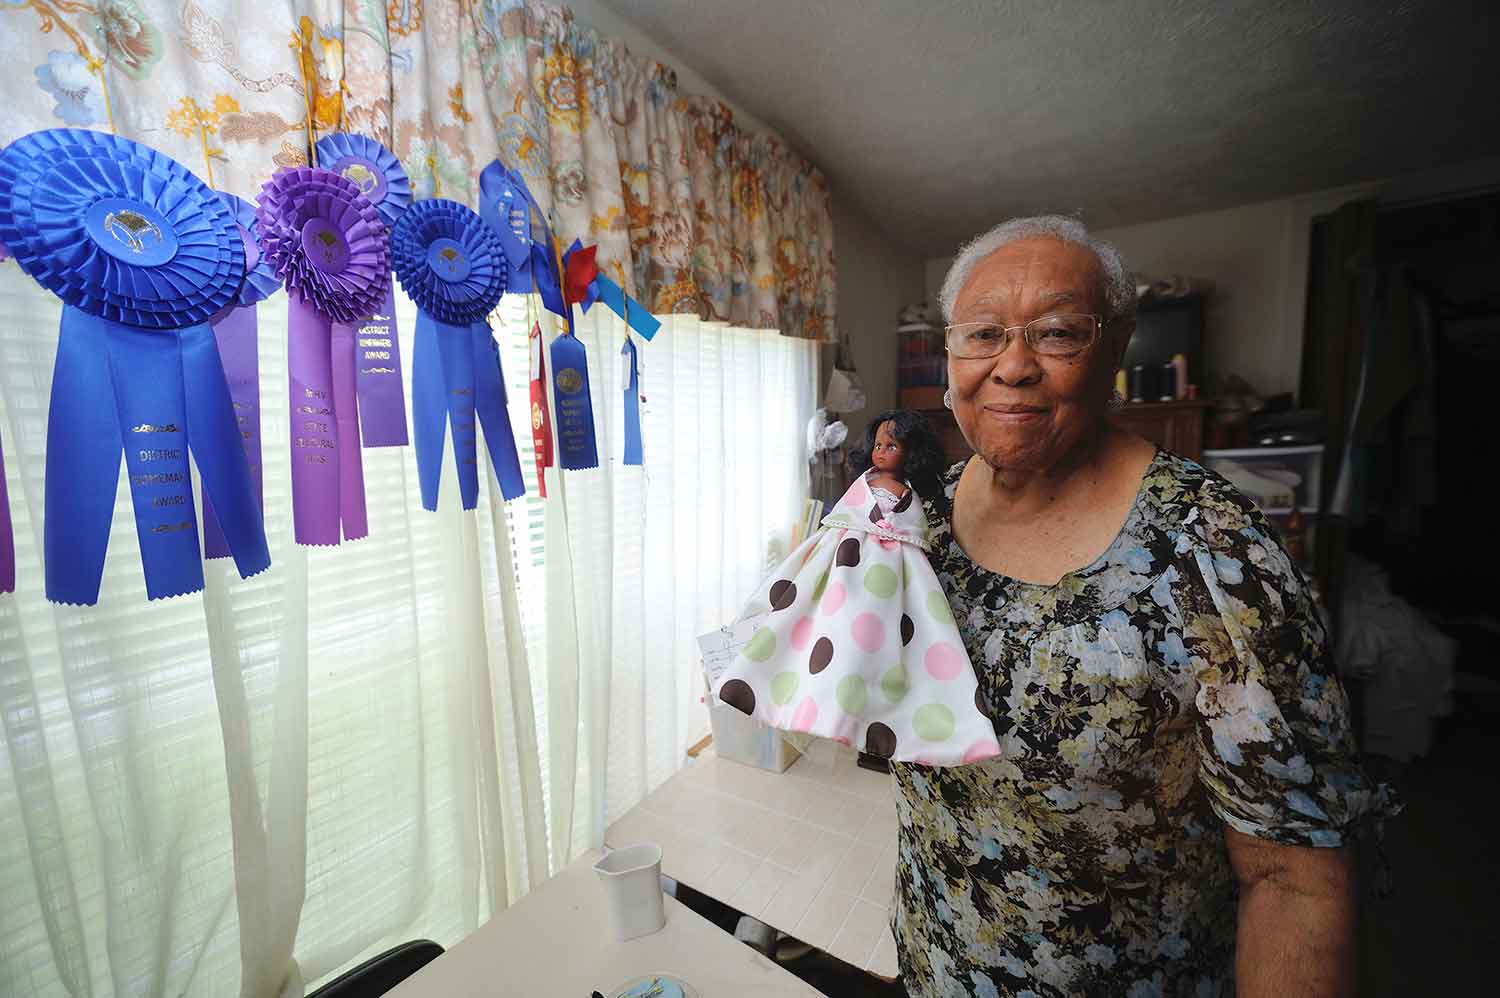 An woman with short grey hair stands to the right of a windowsill with blue and purple ribbons hanging from a multicolored curtain. The woman holds a doll wearing a white dress with light green, light pink, and dark brown polka dots.